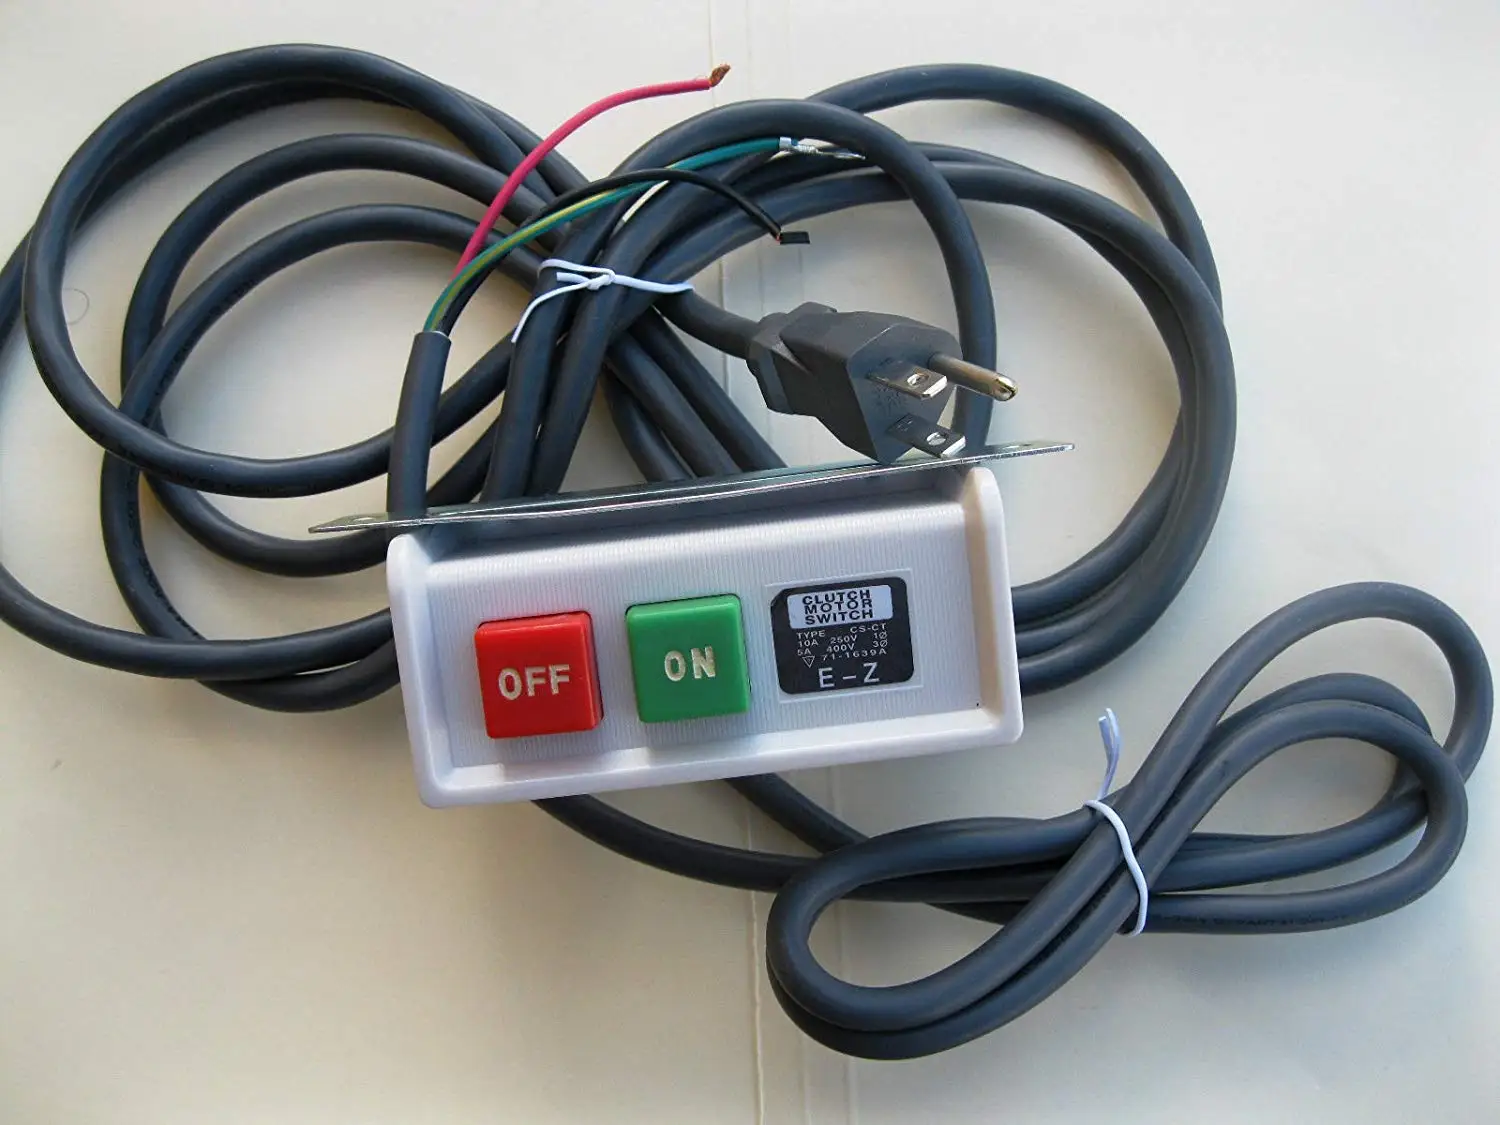 Cheap 110 Volt Switch, find 110 Volt Switch deals on line at Alibaba.com